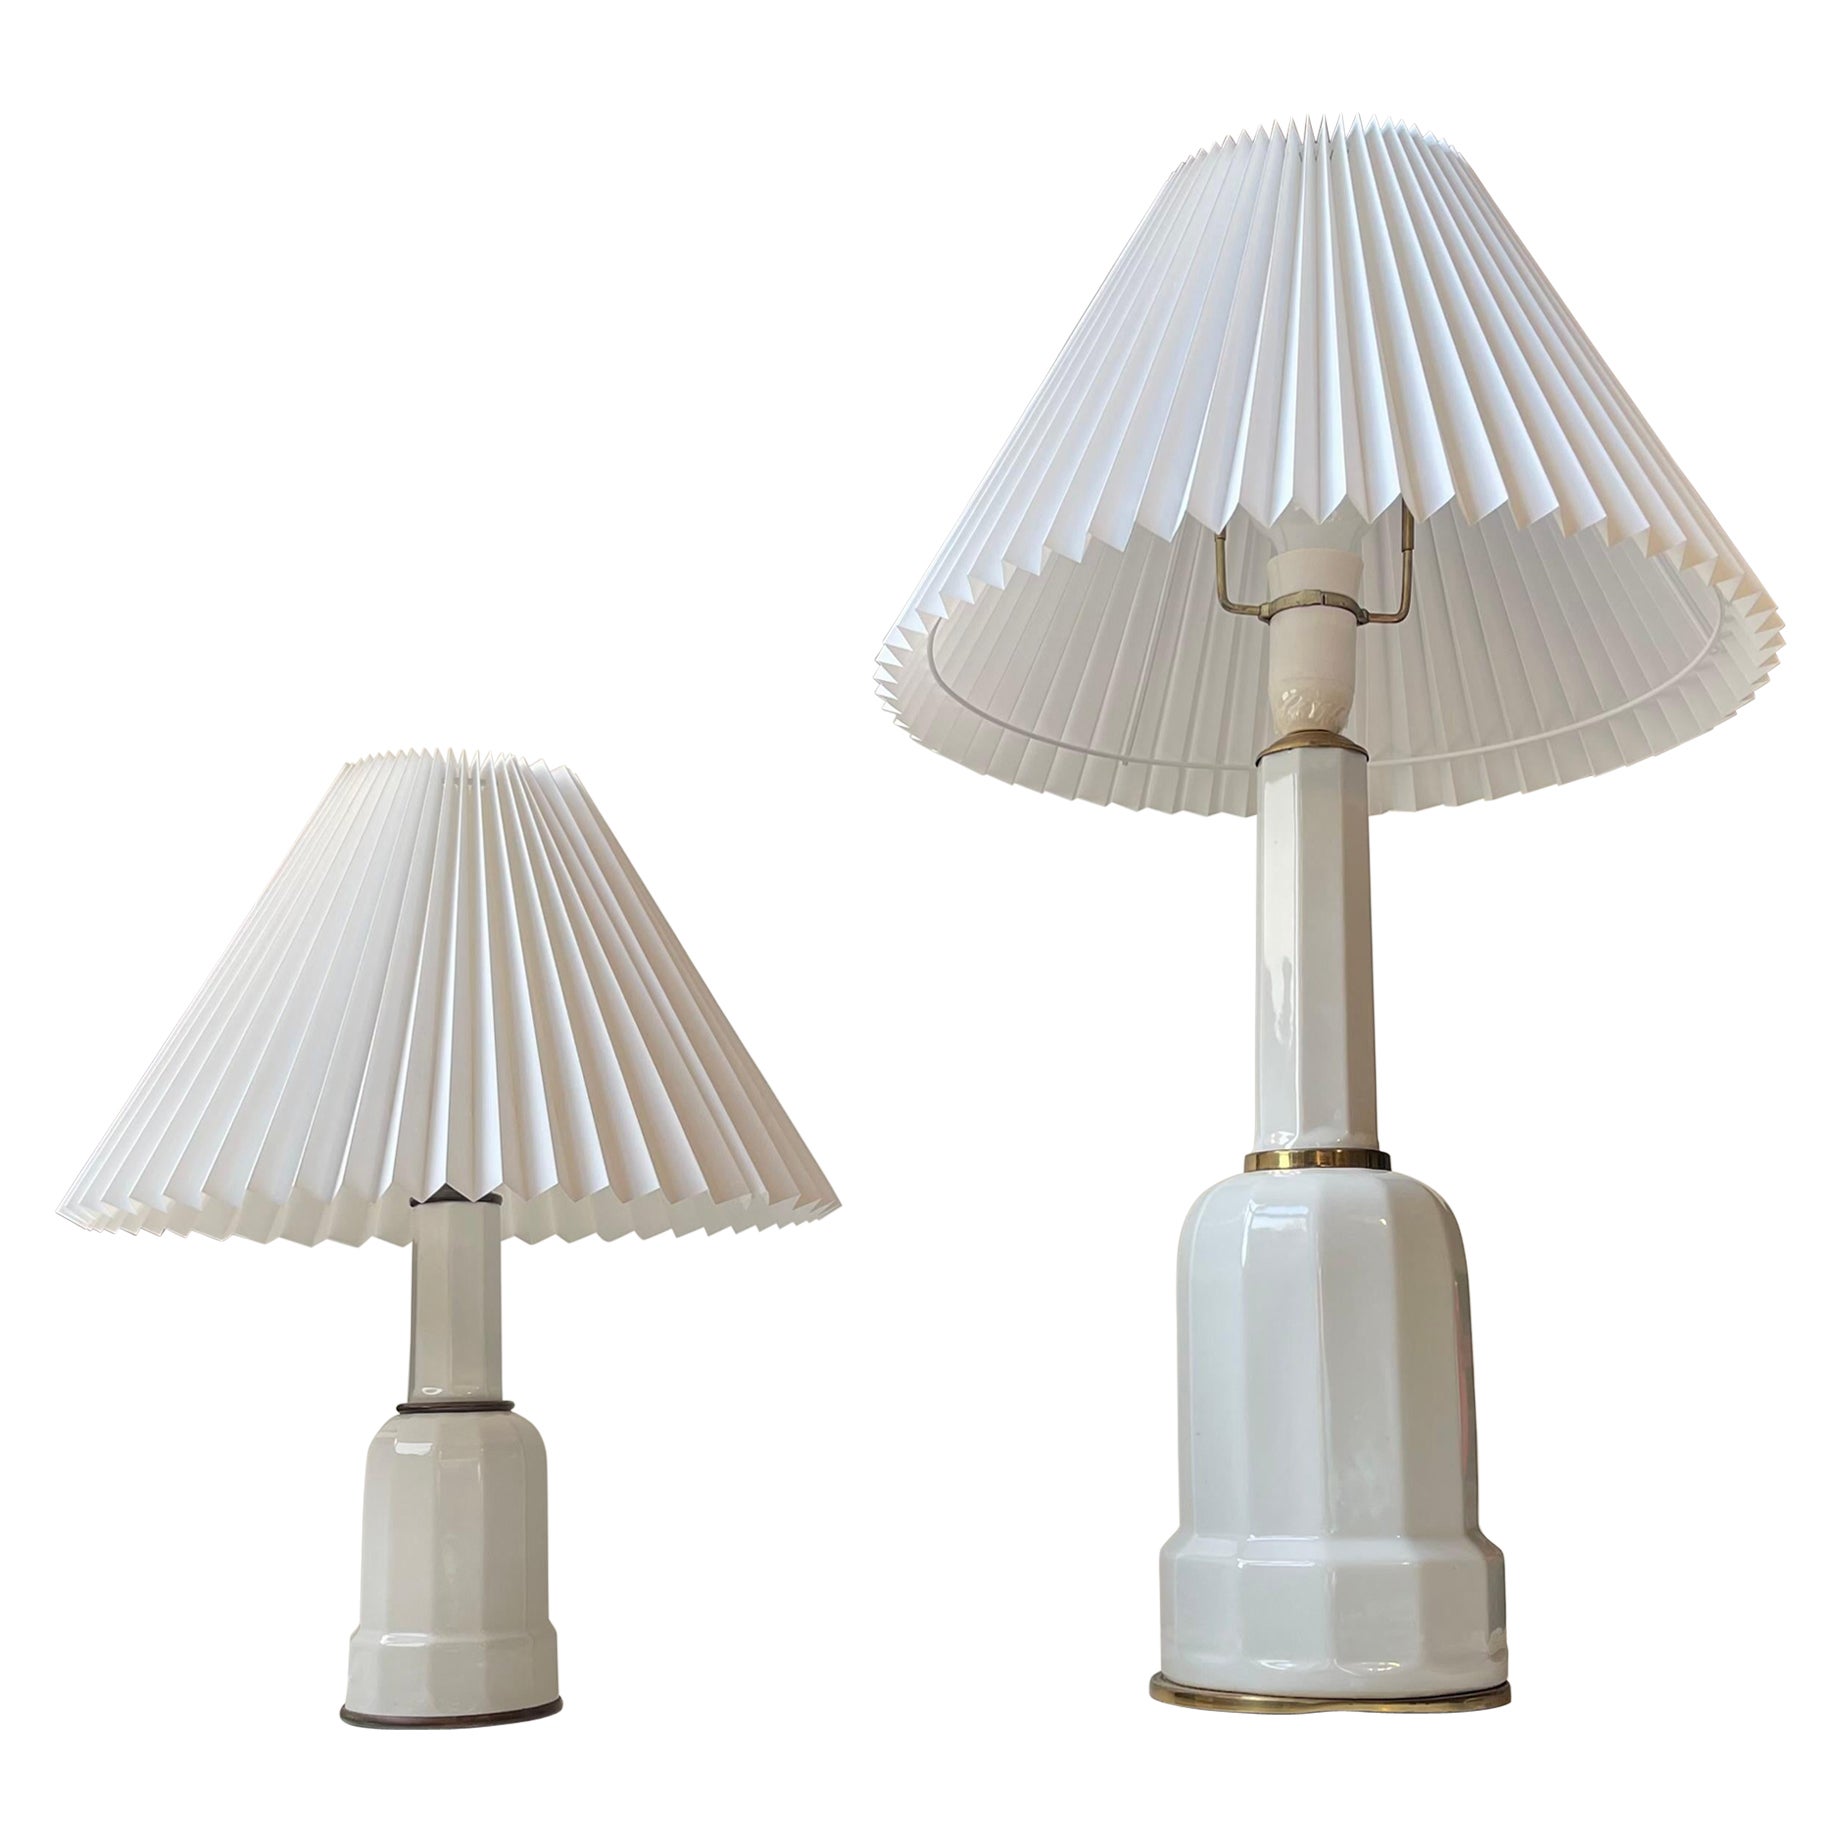 Antique Danish Heiberg Table Lamps in White Porcelain and Brass